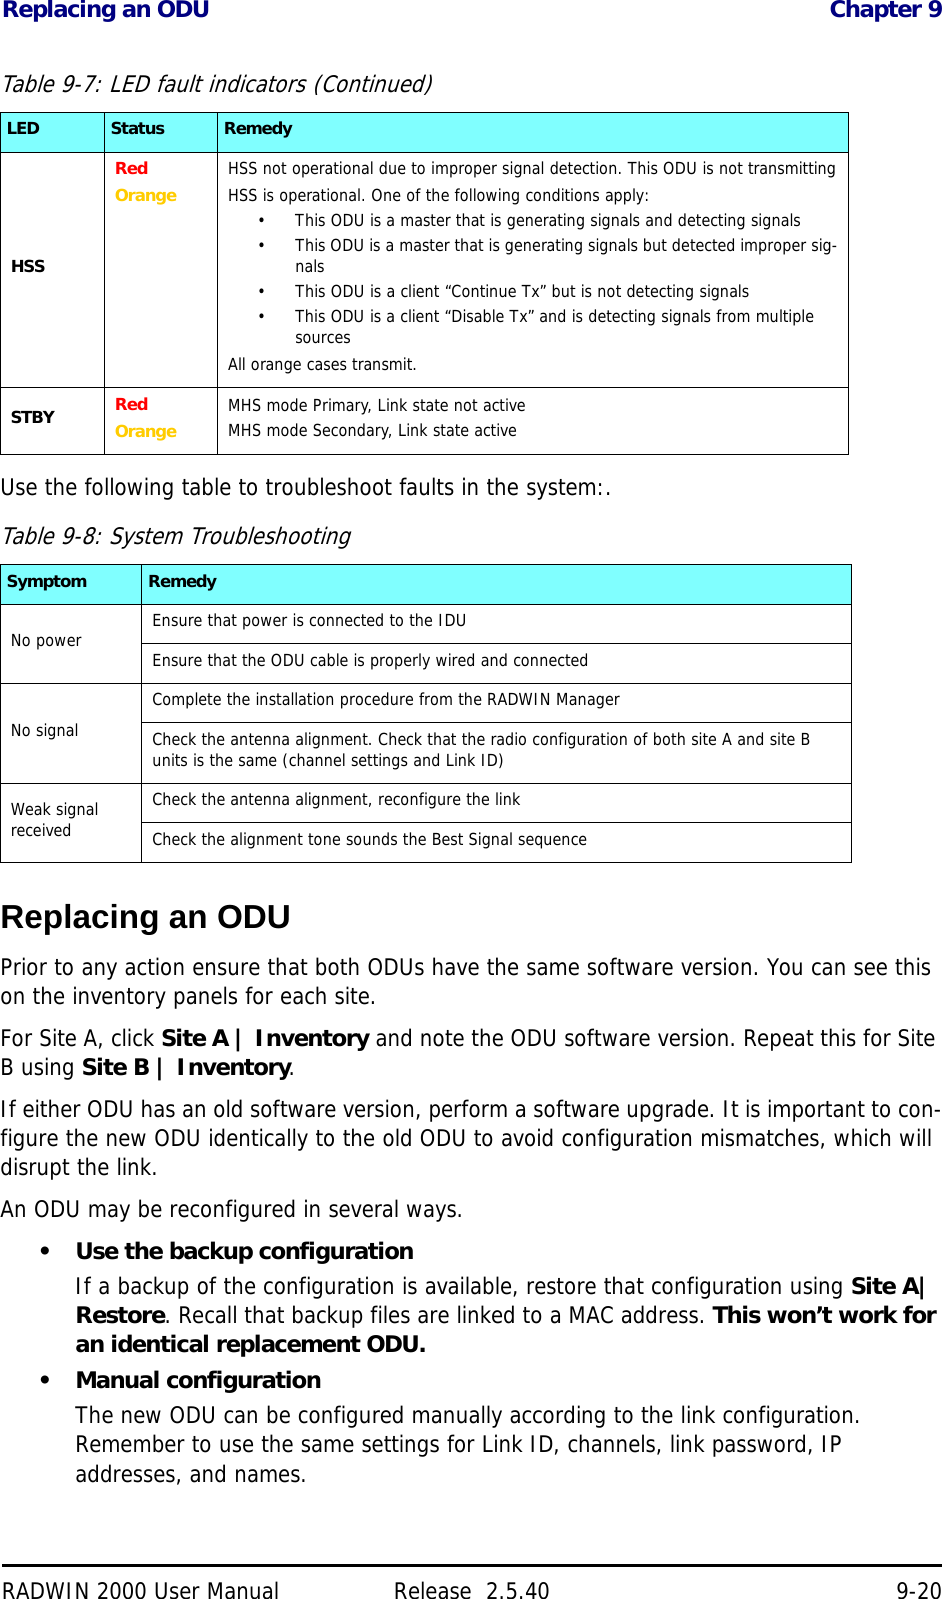 Replacing an ODU Chapter 9RADWIN 2000 User Manual Release  2.5.40 9-20Use the following table to troubleshoot faults in the system:.Replacing an ODUPrior to any action ensure that both ODUs have the same software version. You can see this on the inventory panels for each site.For Site A, click Site A | Inventory and note the ODU software version. Repeat this for Site B using Site B | Inventory.If either ODU has an old software version, perform a software upgrade. It is important to con-figure the new ODU identically to the old ODU to avoid configuration mismatches, which will disrupt the link.An ODU may be reconfigured in several ways. • Use the backup configurationIf a backup of the configuration is available, restore that configuration using Site A| Restore. Recall that backup files are linked to a MAC address. This won’t work for an identical replacement ODU.• Manual configurationThe new ODU can be configured manually according to the link configuration. Remember to use the same settings for Link ID, channels, link password, IP addresses, and names. HSSRedOrange HSS not operational due to improper signal detection. This ODU is not transmittingHSS is operational. One of the following conditions apply:• This ODU is a master that is generating signals and detecting signals• This ODU is a master that is generating signals but detected improper sig-nals• This ODU is a client “Continue Tx” but is not detecting signals• This ODU is a client “Disable Tx” and is detecting signals from multiple sourcesAll orange cases transmit.STBY RedOrange MHS mode Primary, Link state not activeMHS mode Secondary, Link state activeTable 9-8: System TroubleshootingSymptom RemedyNo power Ensure that power is connected to the IDUEnsure that the ODU cable is properly wired and connectedNo signalComplete the installation procedure from the RADWIN ManagerCheck the antenna alignment. Check that the radio configuration of both site A and site B units is the same (channel settings and Link ID)Weak signal receivedCheck the antenna alignment, reconfigure the linkCheck the alignment tone sounds the Best Signal sequenceTable 9-7: LED fault indicators (Continued)LED Status Remedy